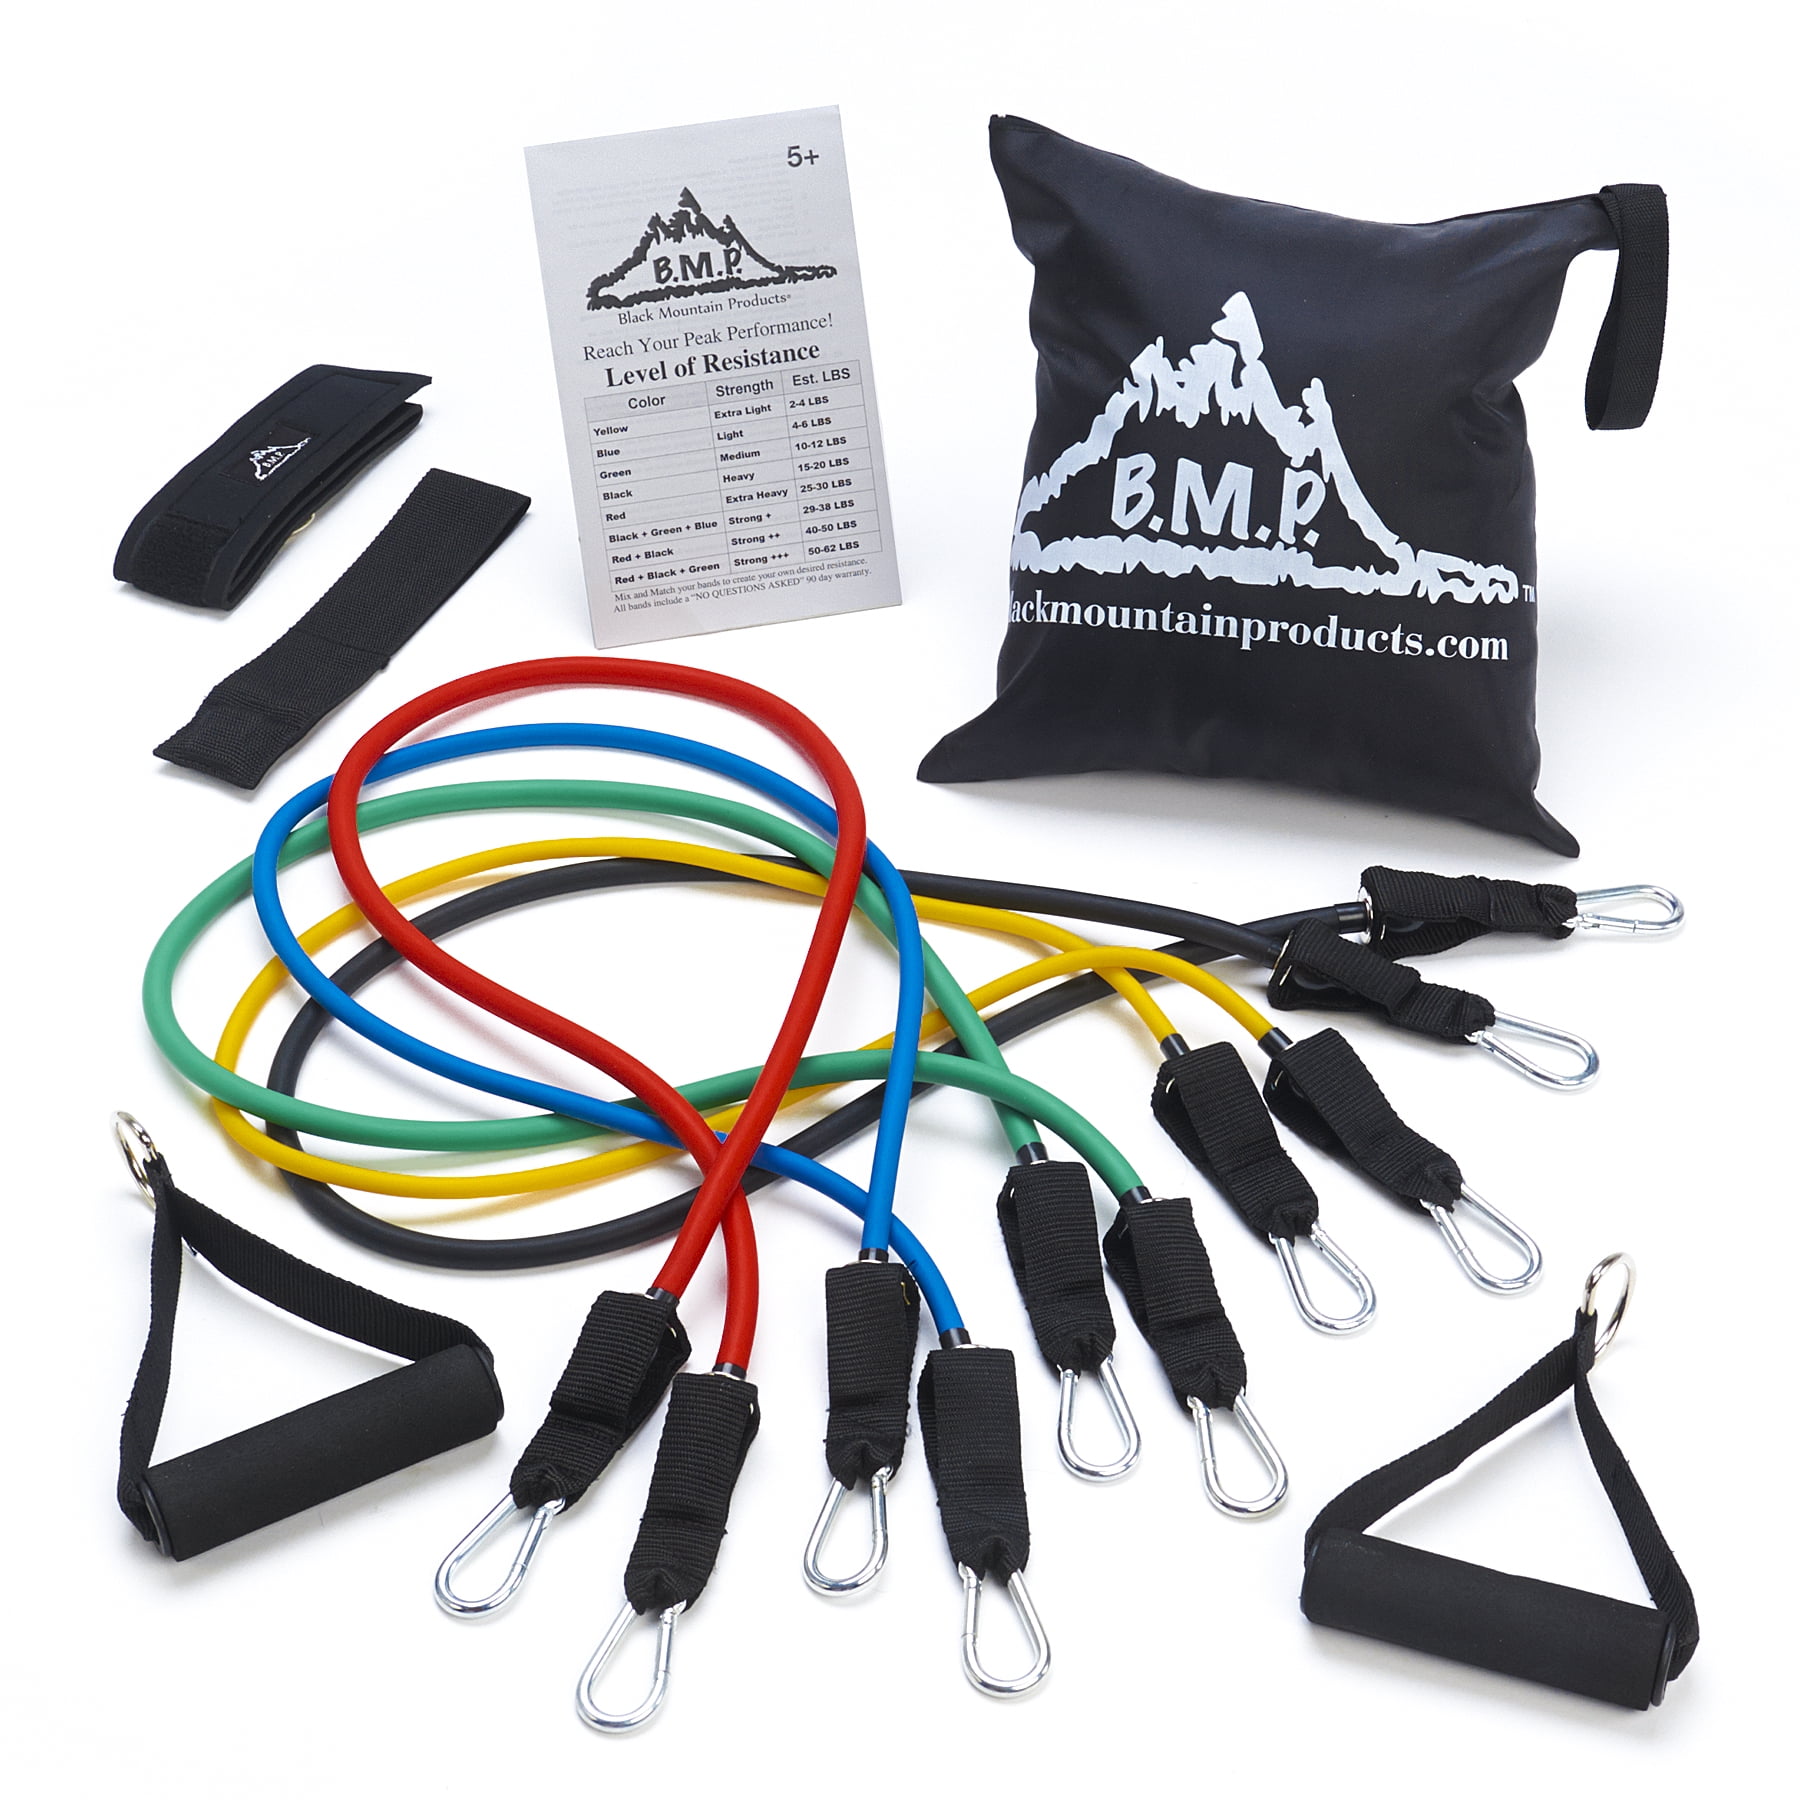 TUYOI Resistance Bands Set,Exercise Bands with Handles,Ankle Straps,Door Anchor, 